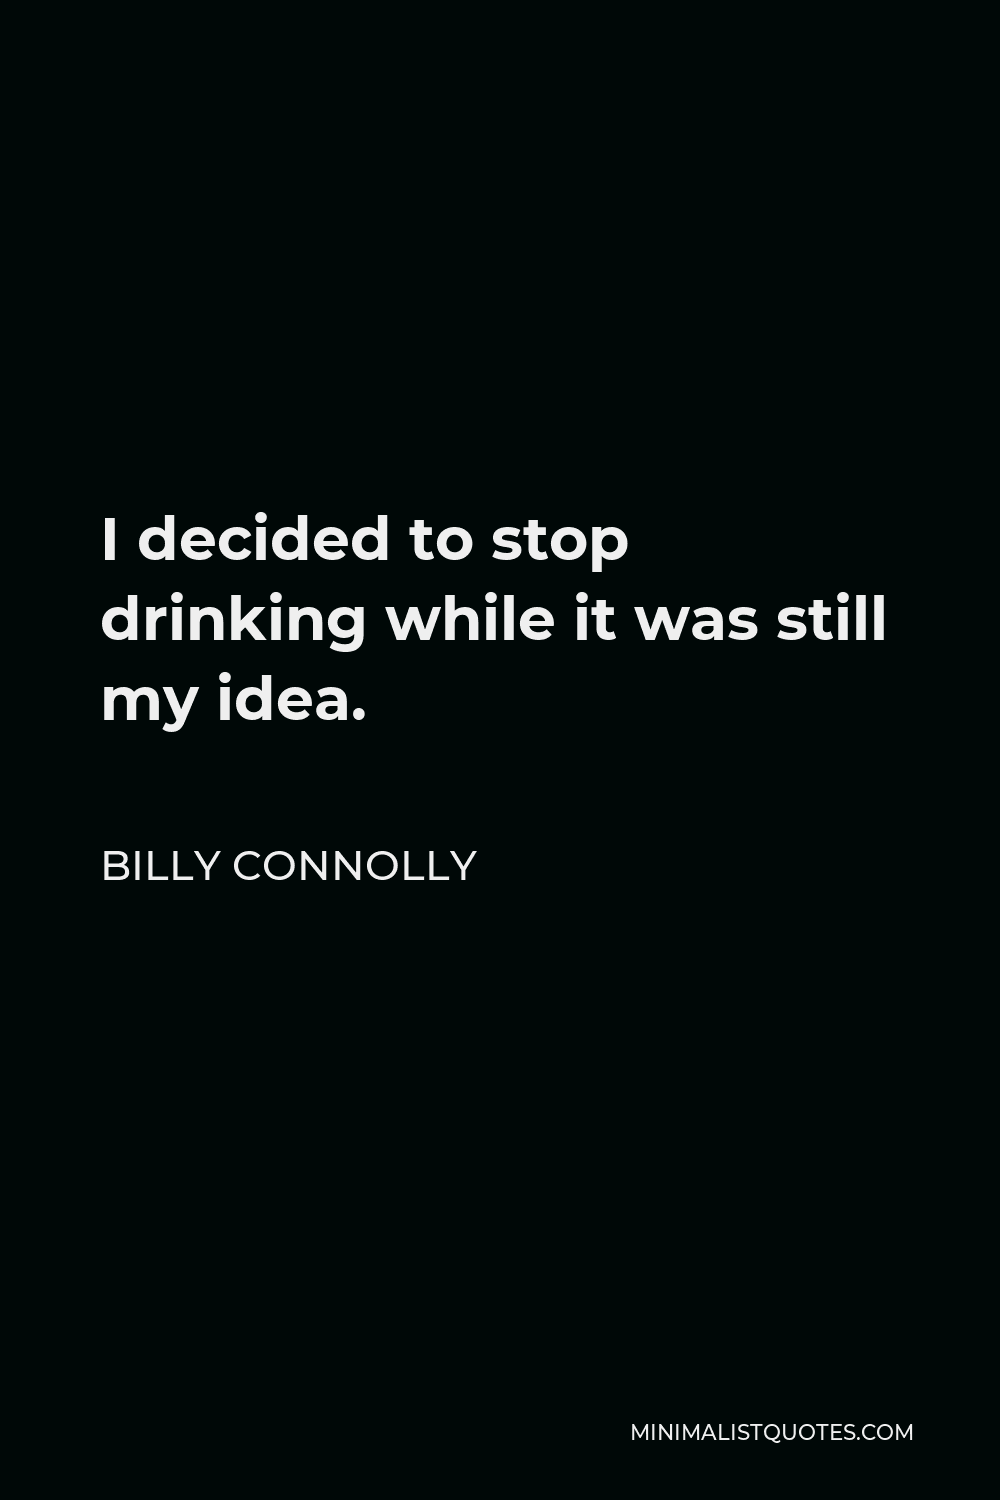 Billy Connolly Quote - I decided to stop drinking while it was still my idea.